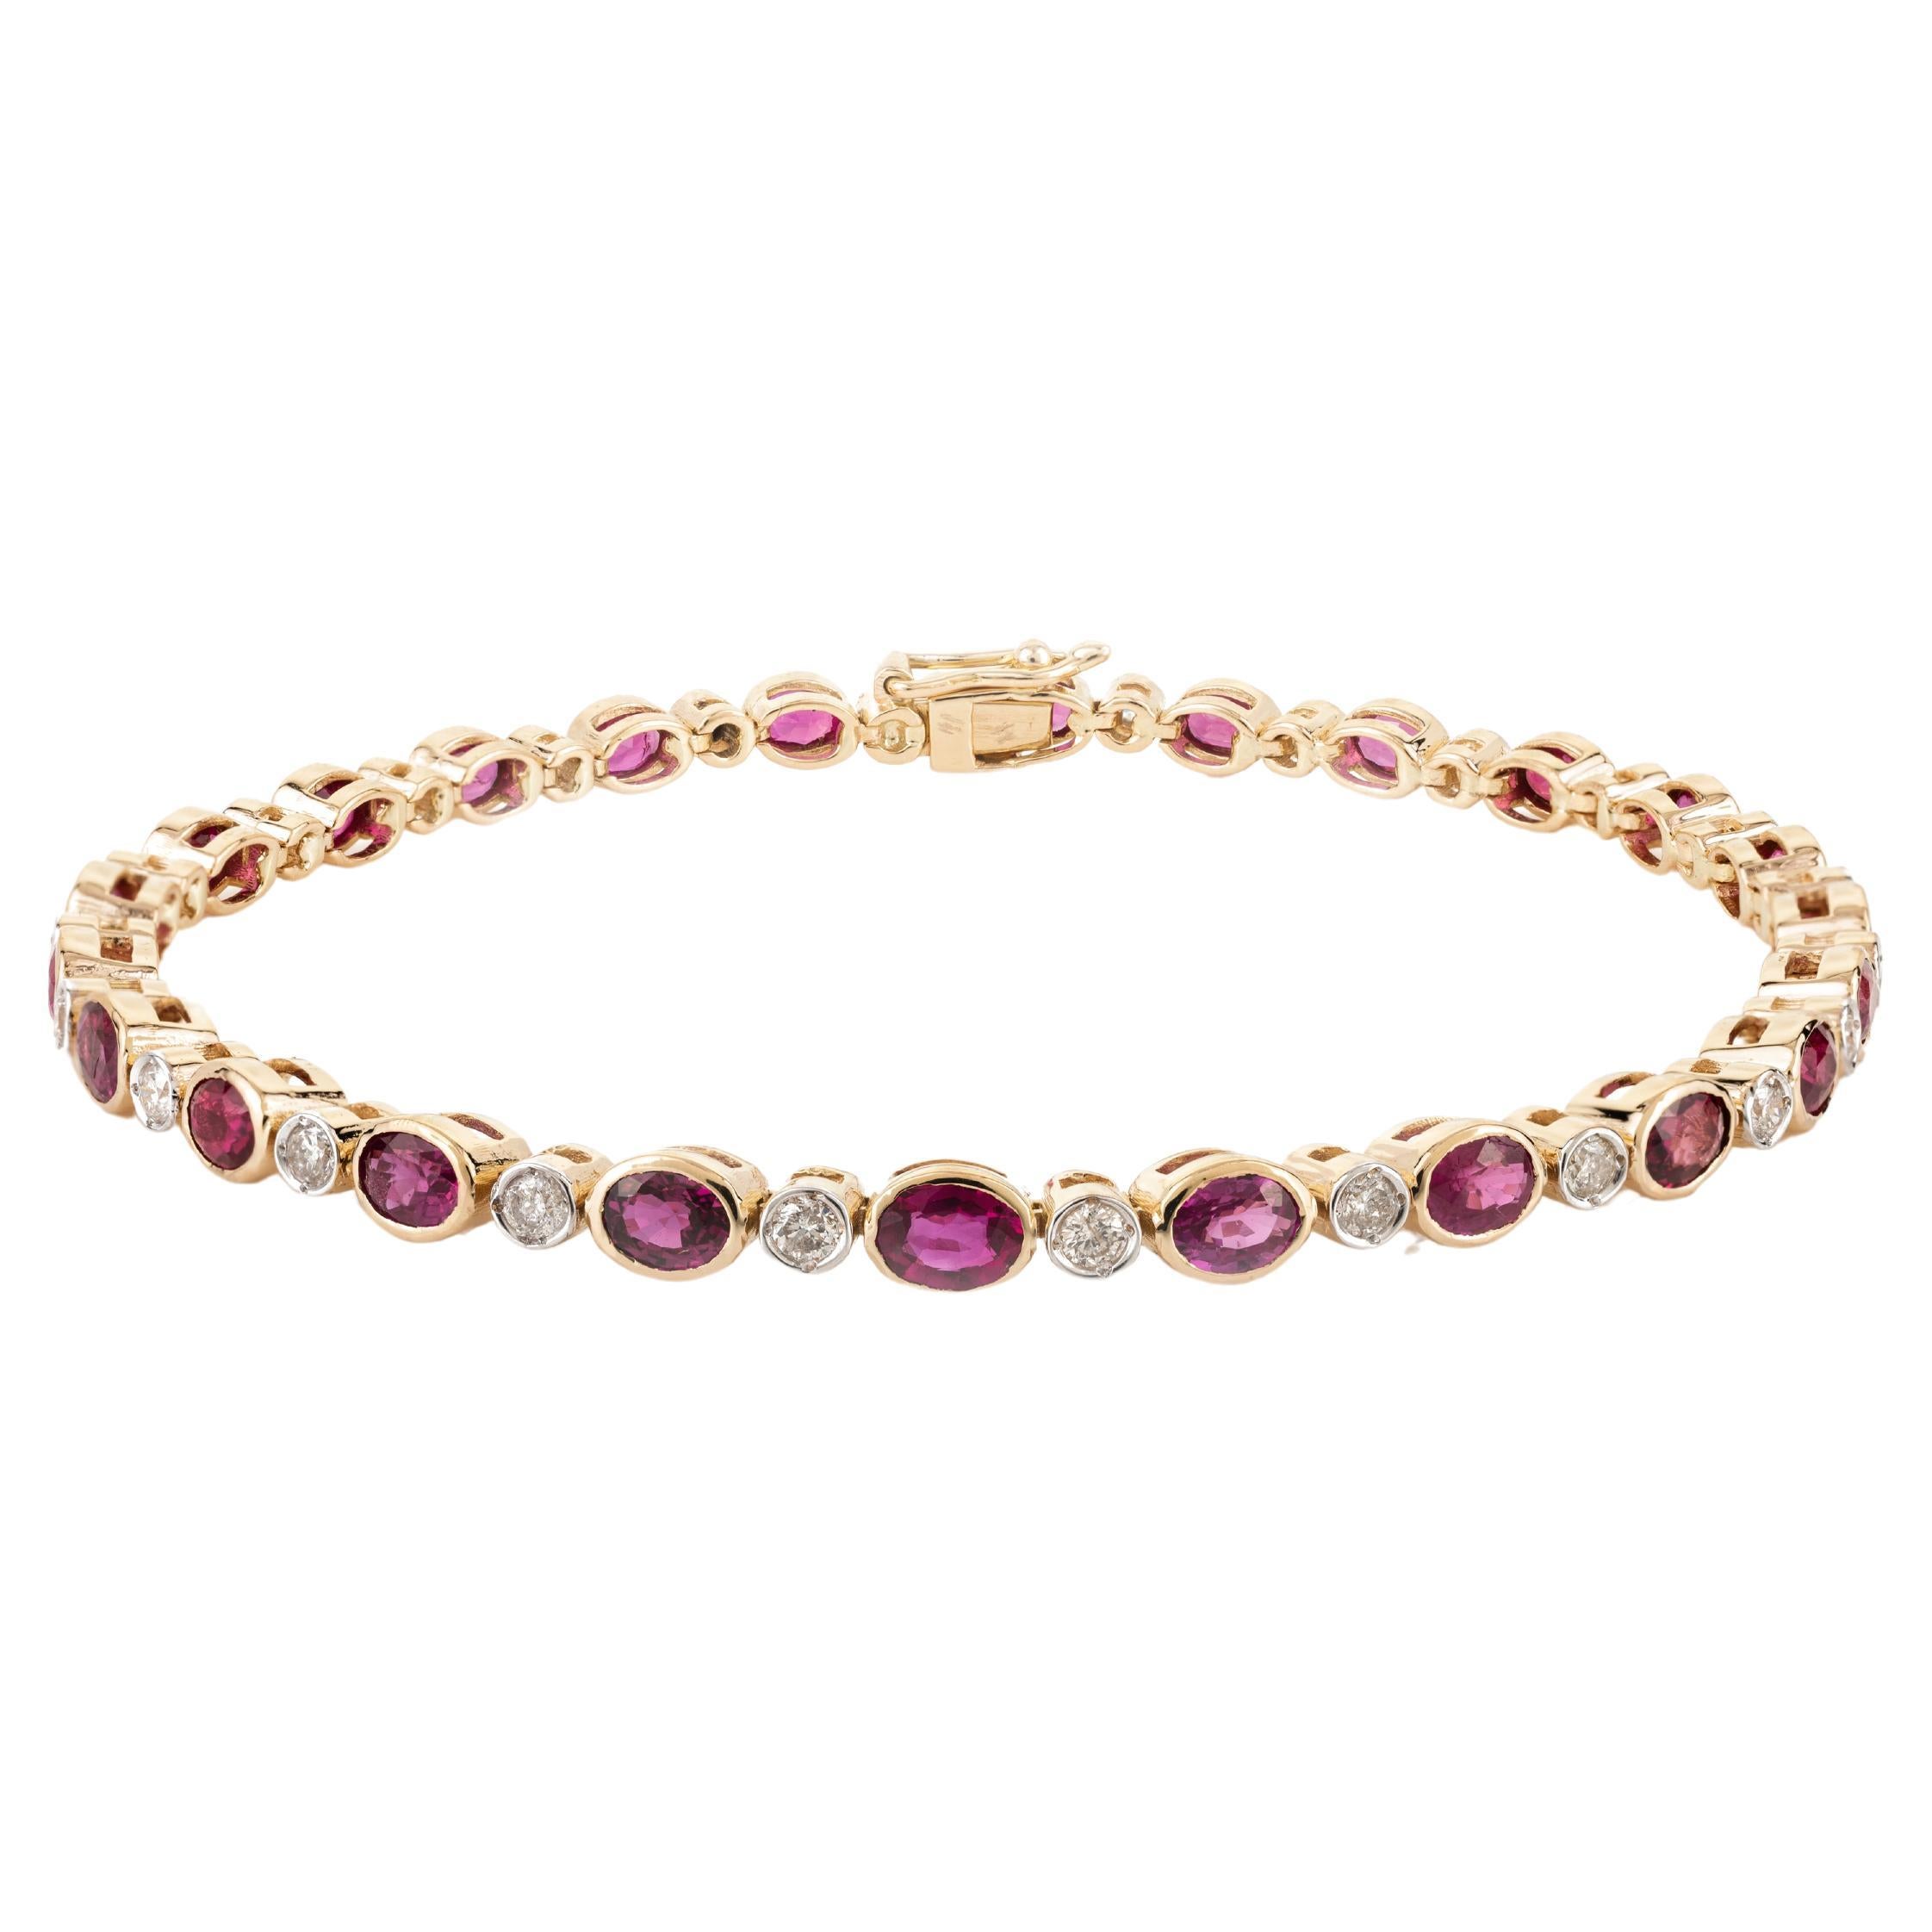 4.9 Carat Faceted Ruby Diamond Tennis Bracelet in 18k Solid Yellow Gold For Sale